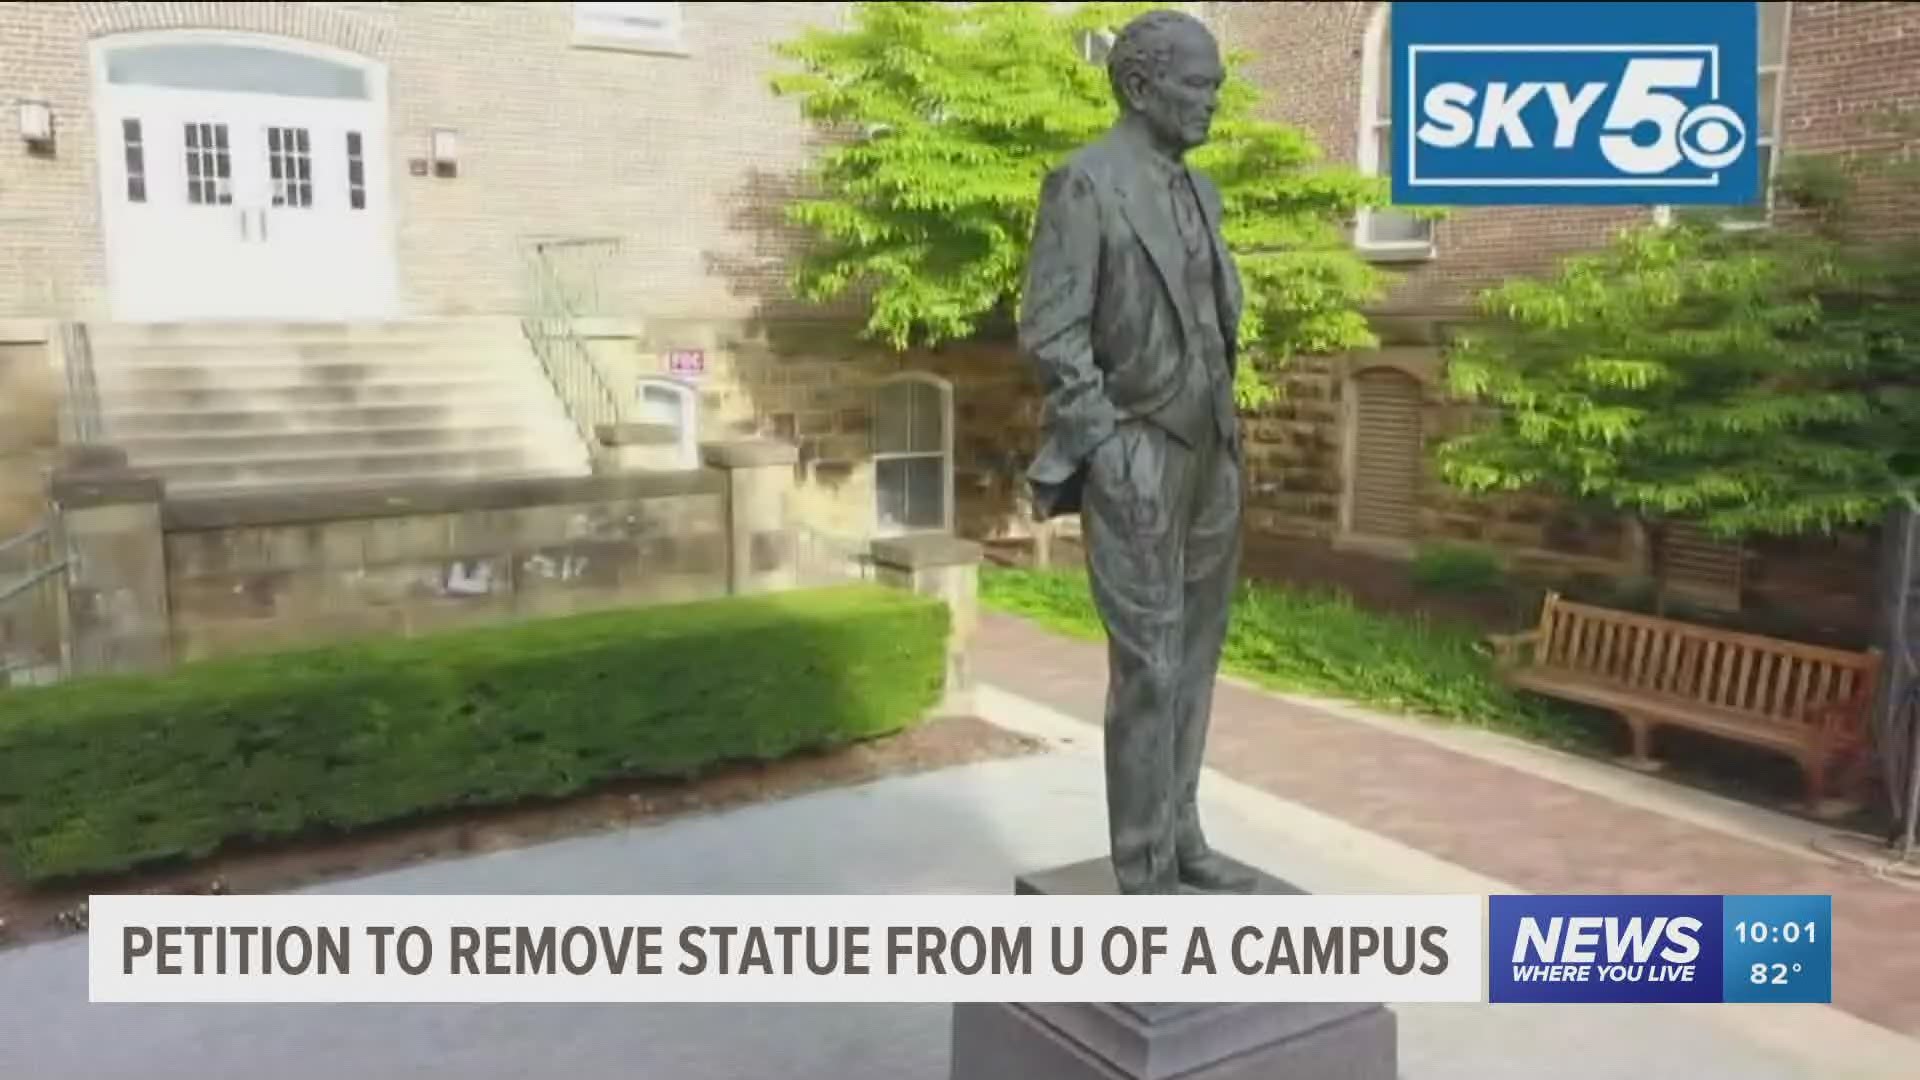 The Black Student Caucus at the U of A is petitioning to remove his statue and name from the campus. https://bit.ly/2NO9q0R